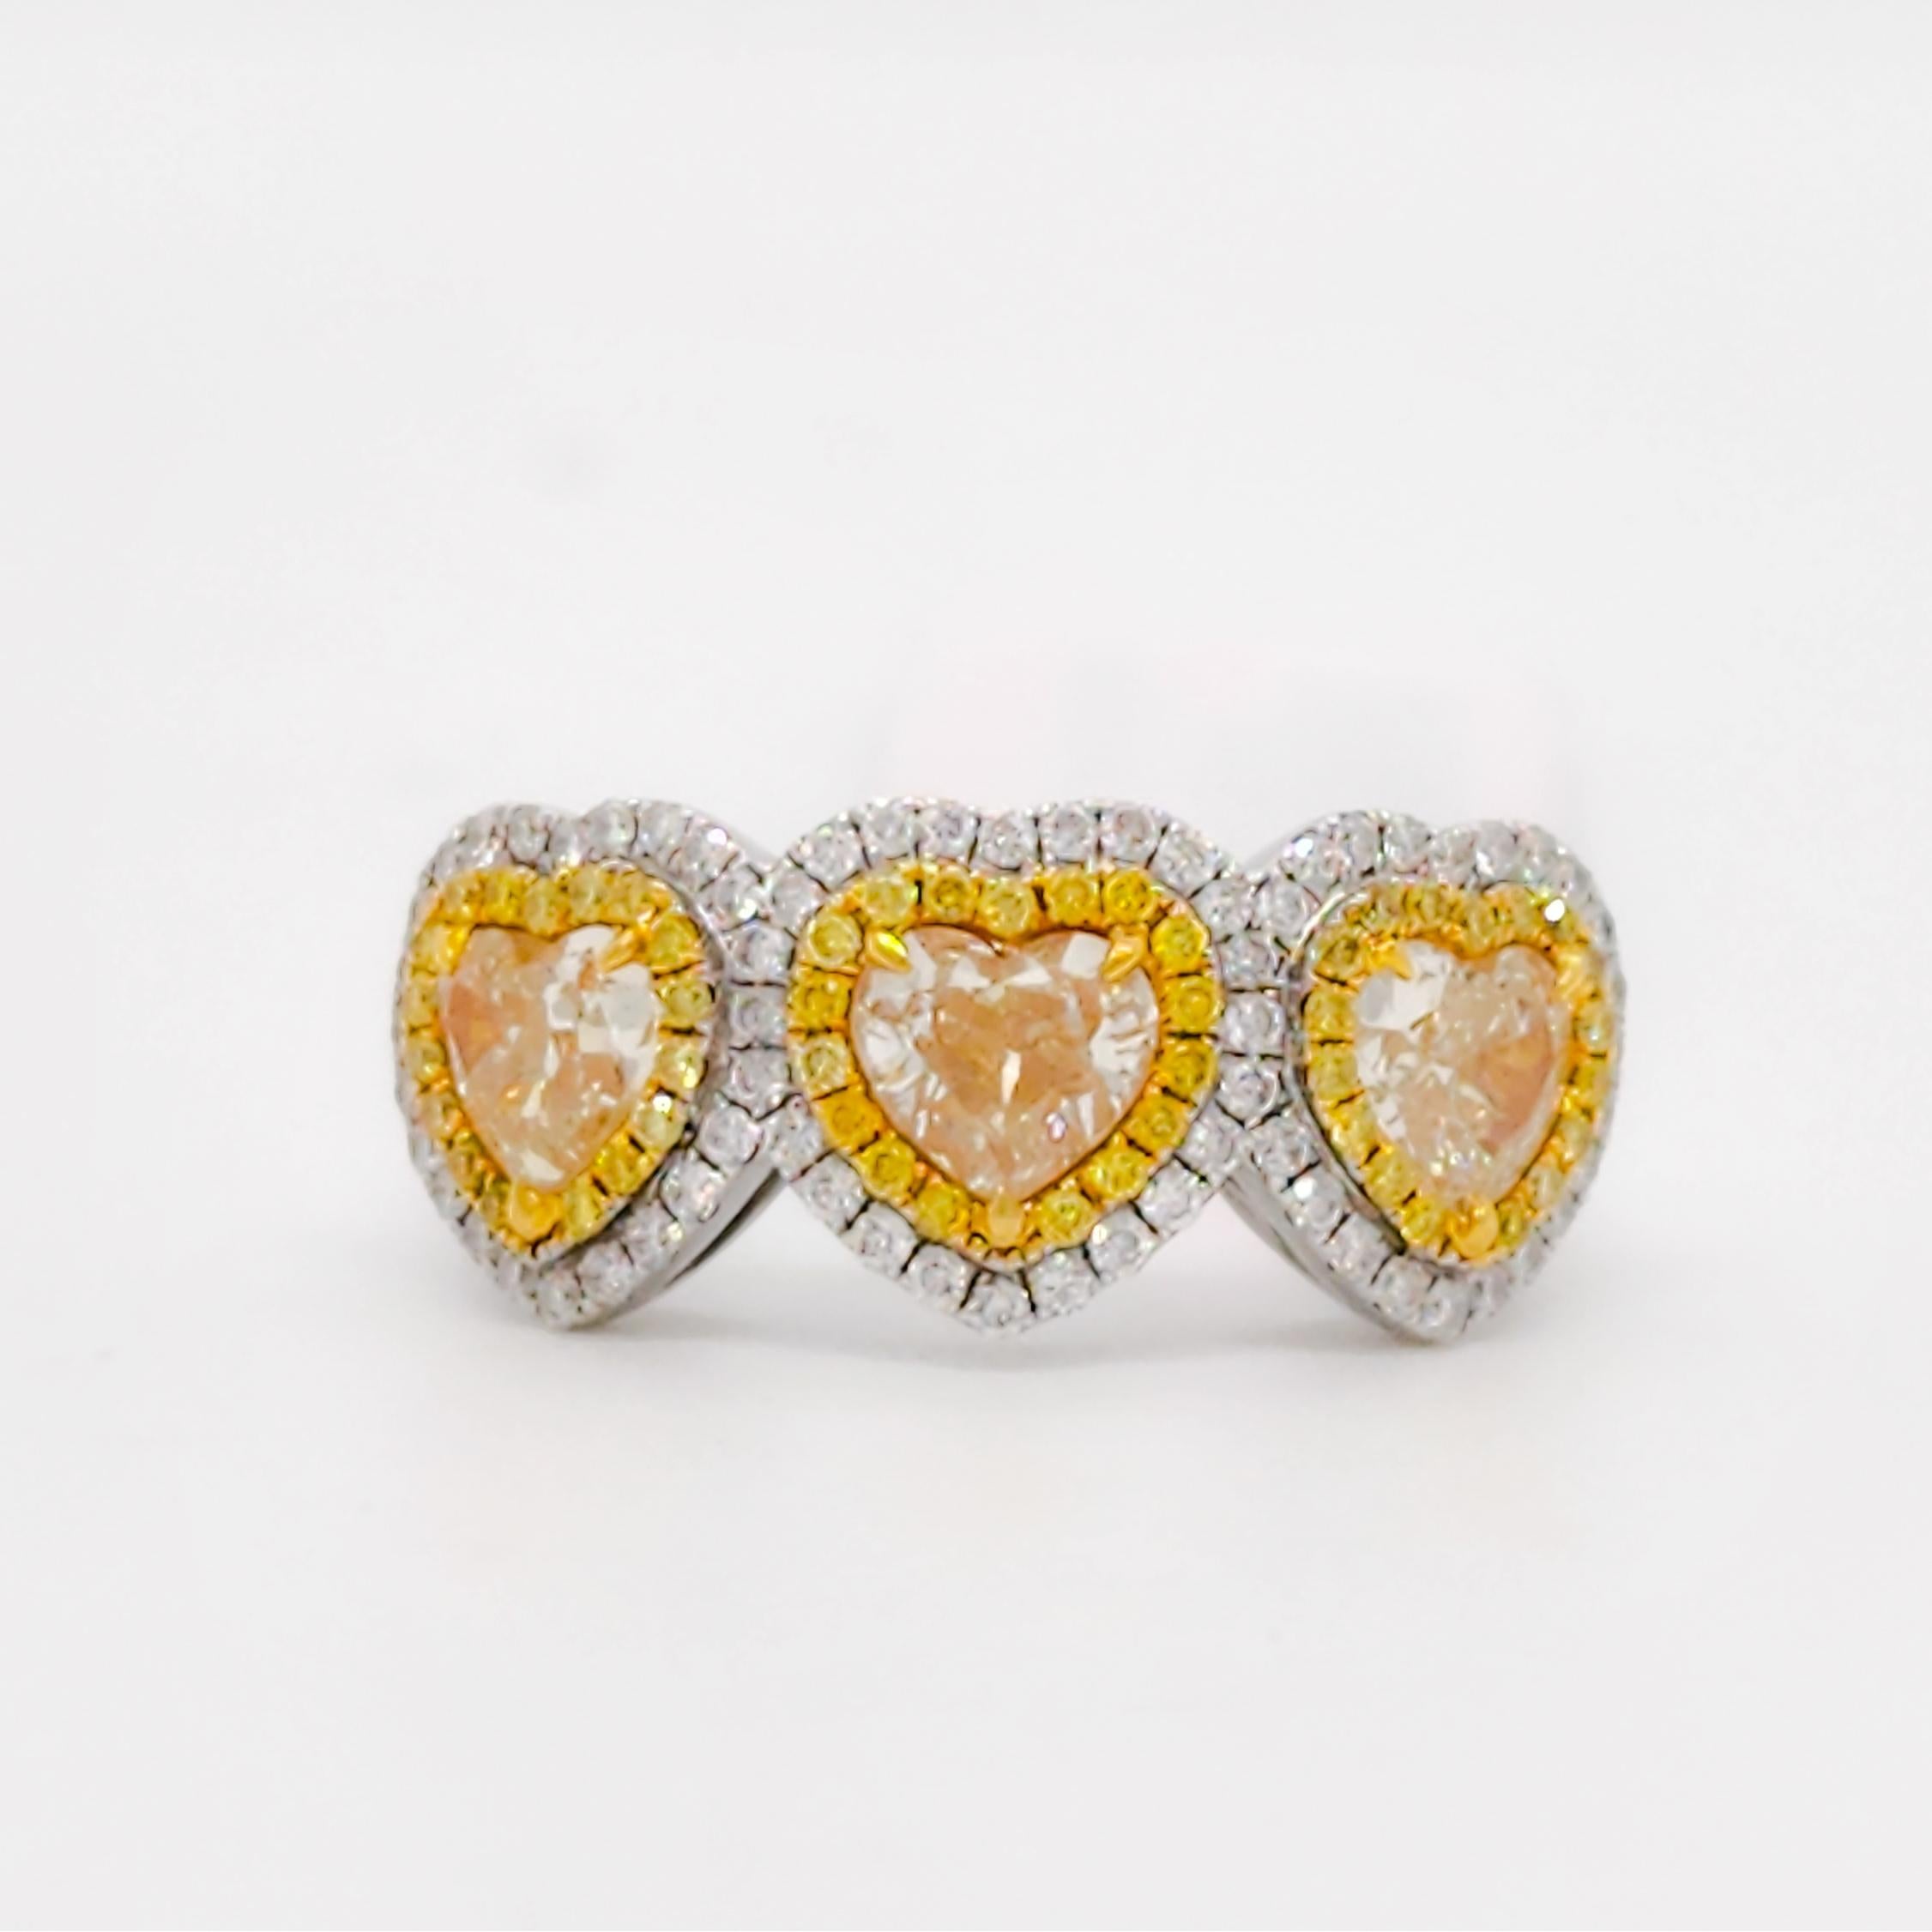 Gorgeous three heart ring with 1.68 ct. bright yellow diamond heart shapes and 0.57 ct. yellow and white diamond rounds.  Handmade in 18k white and yellow gold.  Ring size 6.25.